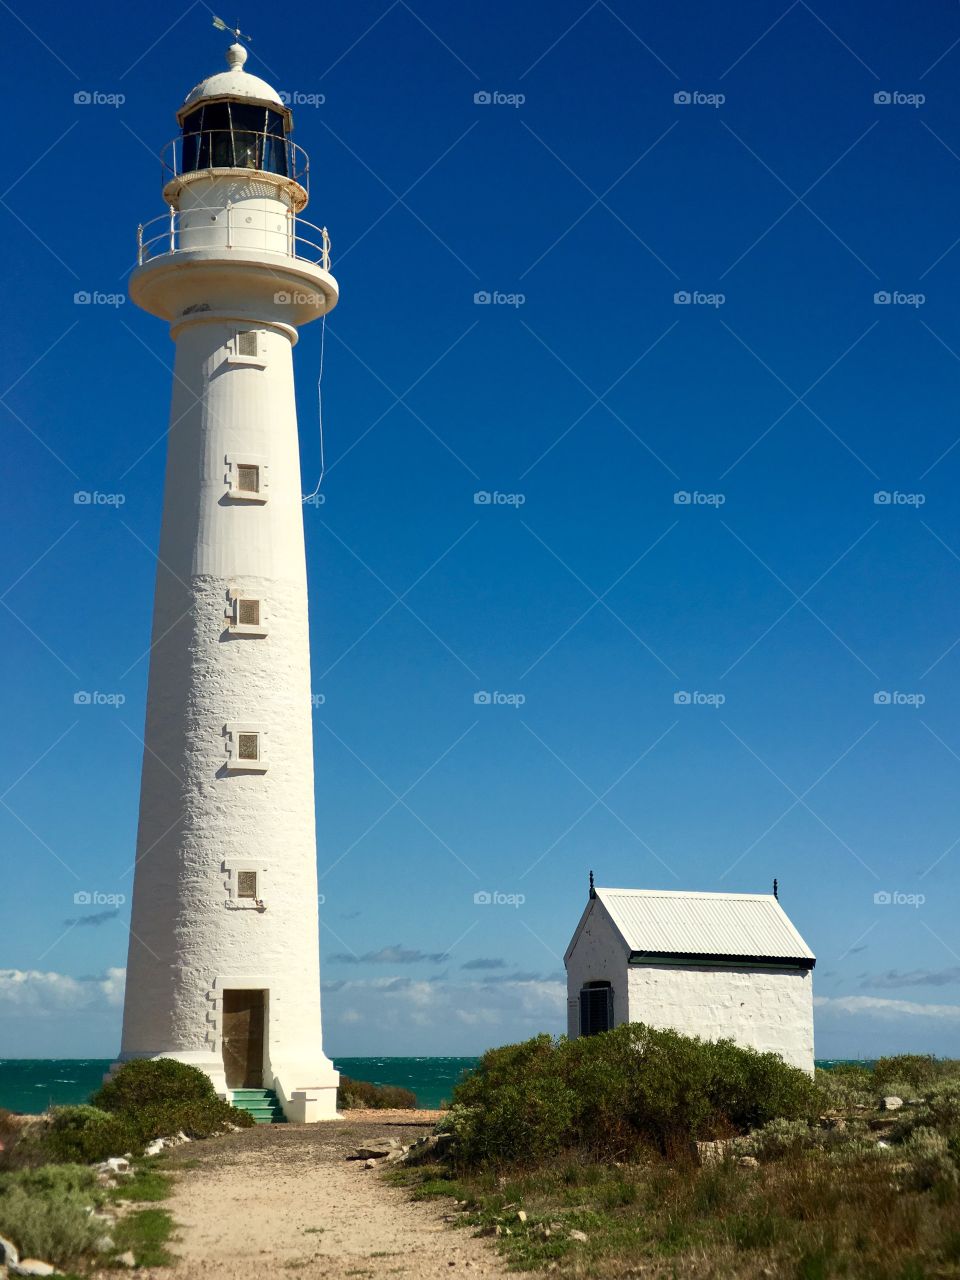 Lighthouse and lighthouse keeper's house, white, Point Lowly, South Australia 